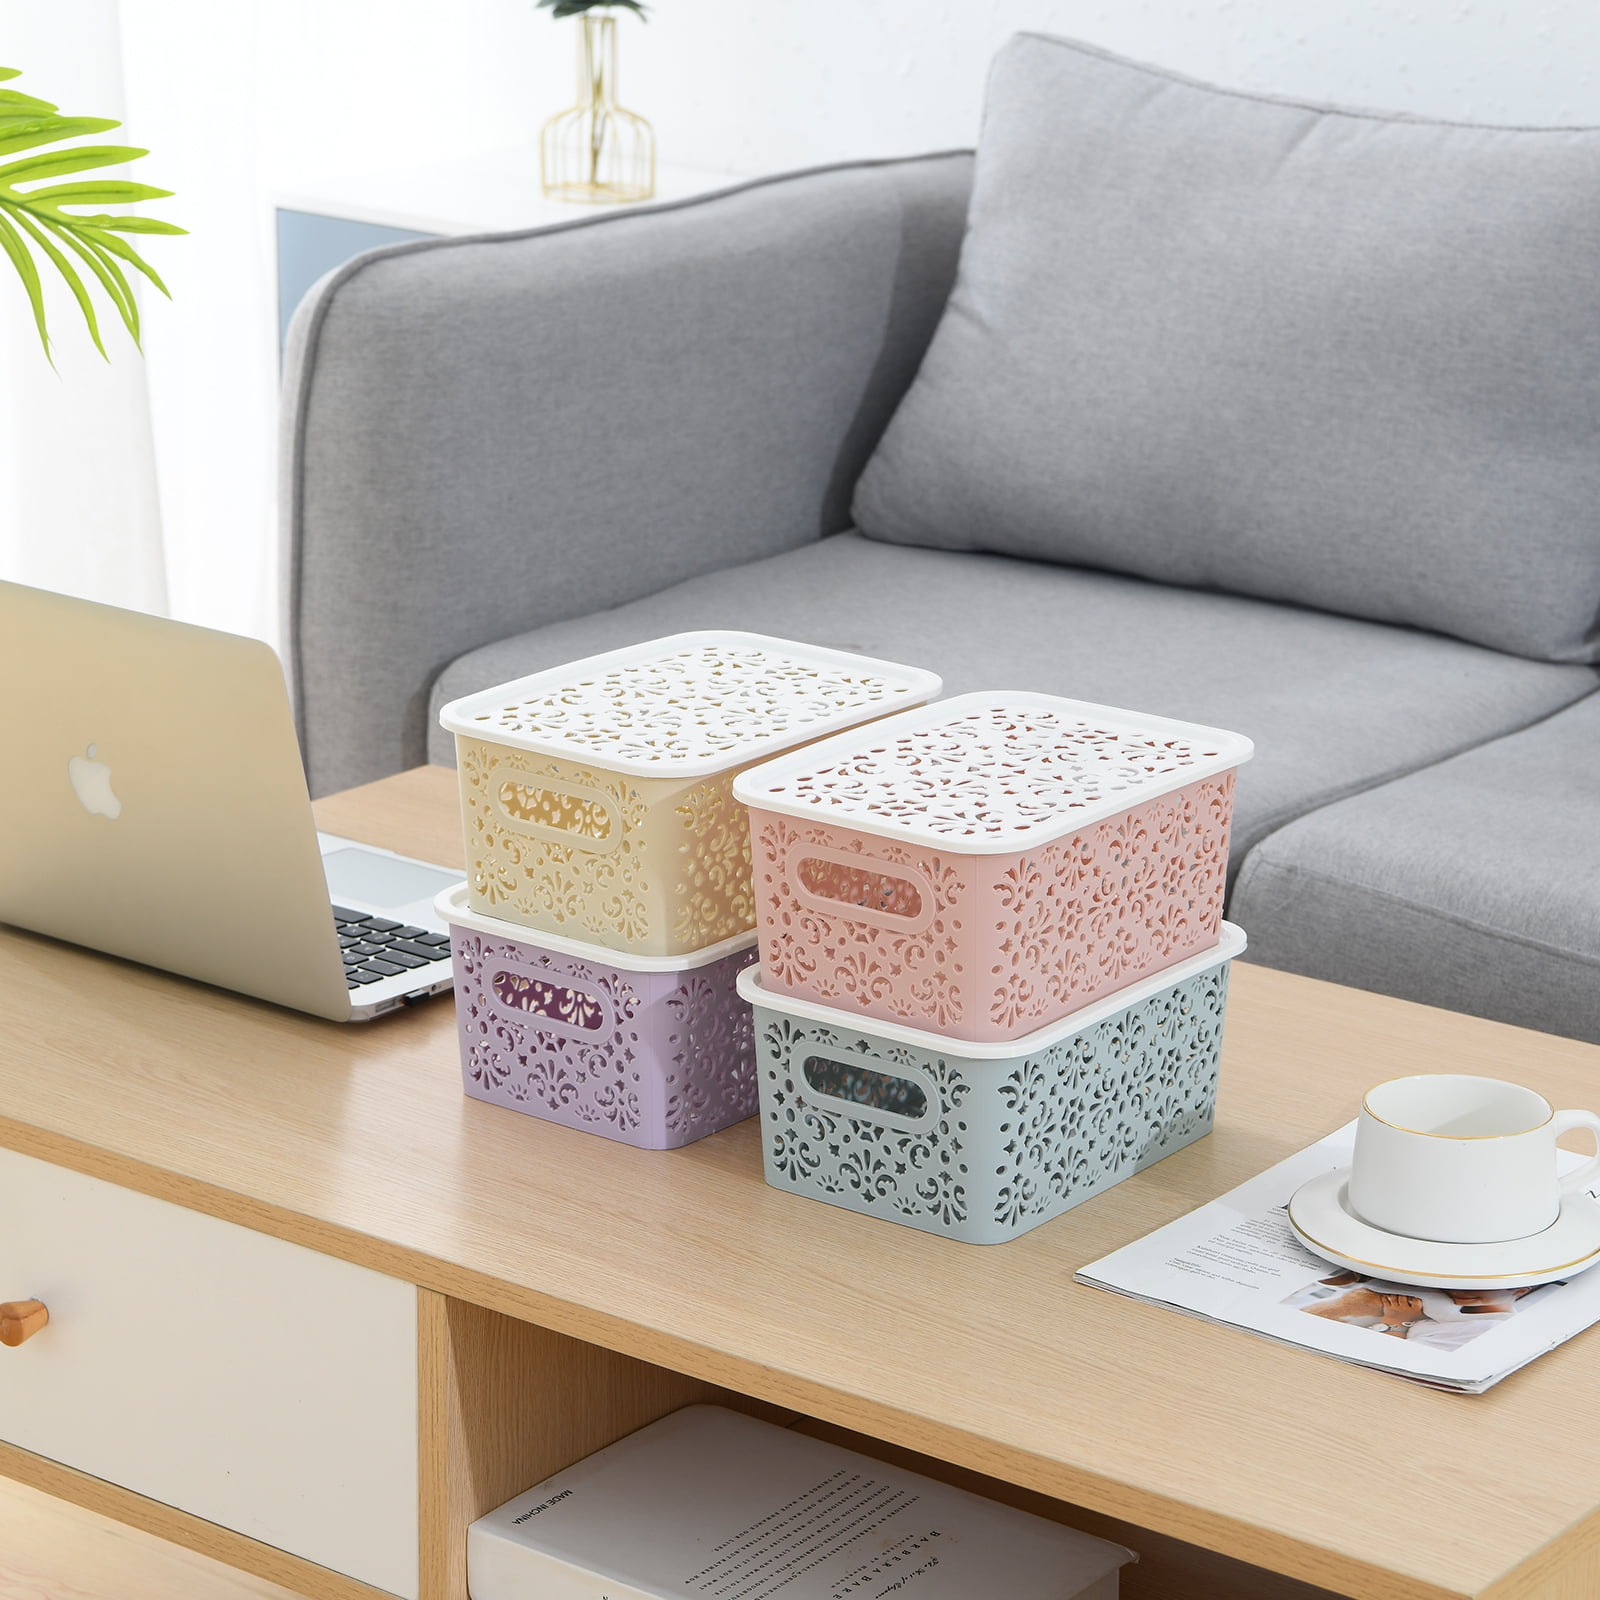 Sets of 3 Stackable Lace-Design Bins with Lids, The Lakeside Collection